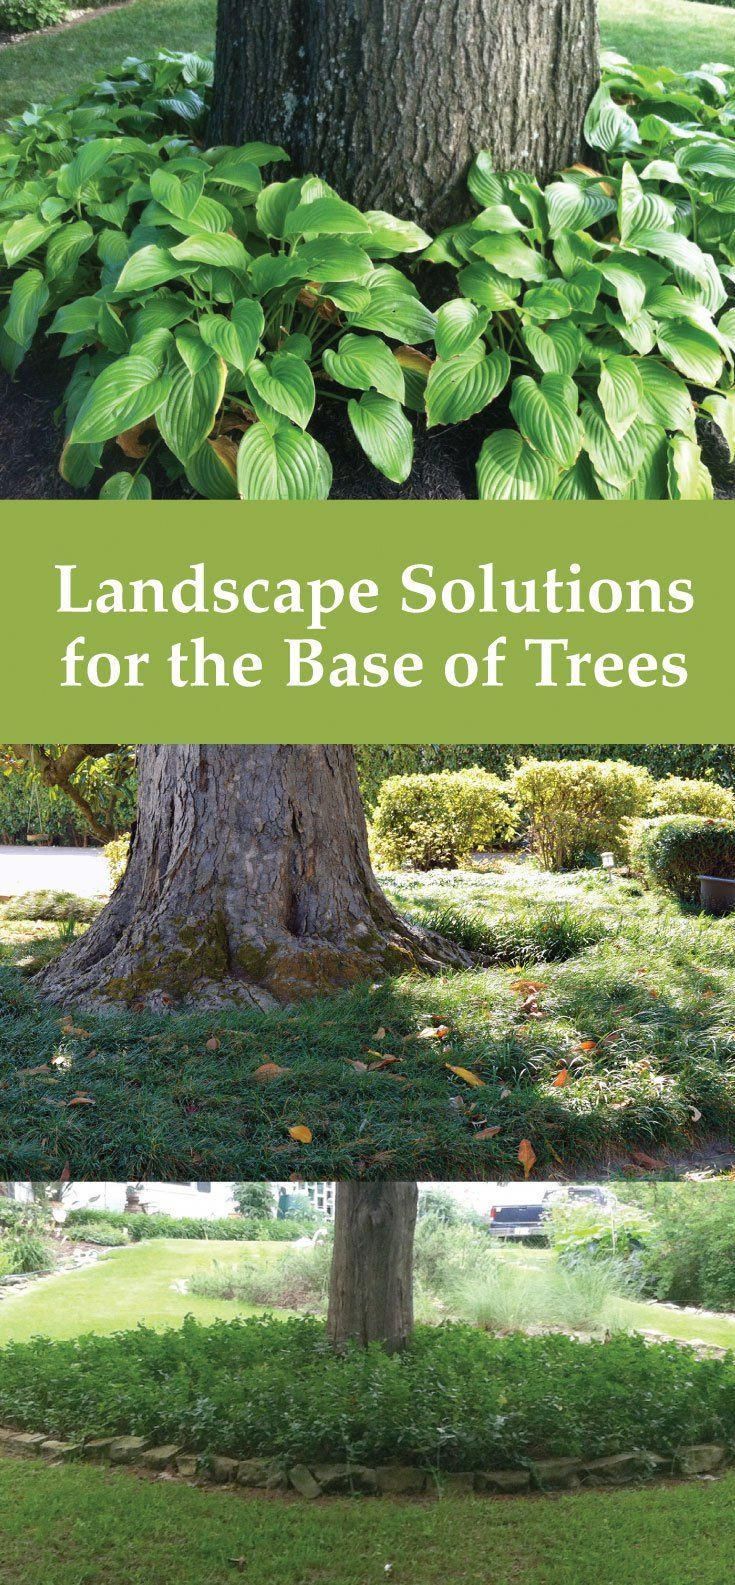 The Best Ideas for Landscaping Around Trees -   20 plants Flowers around trees ideas